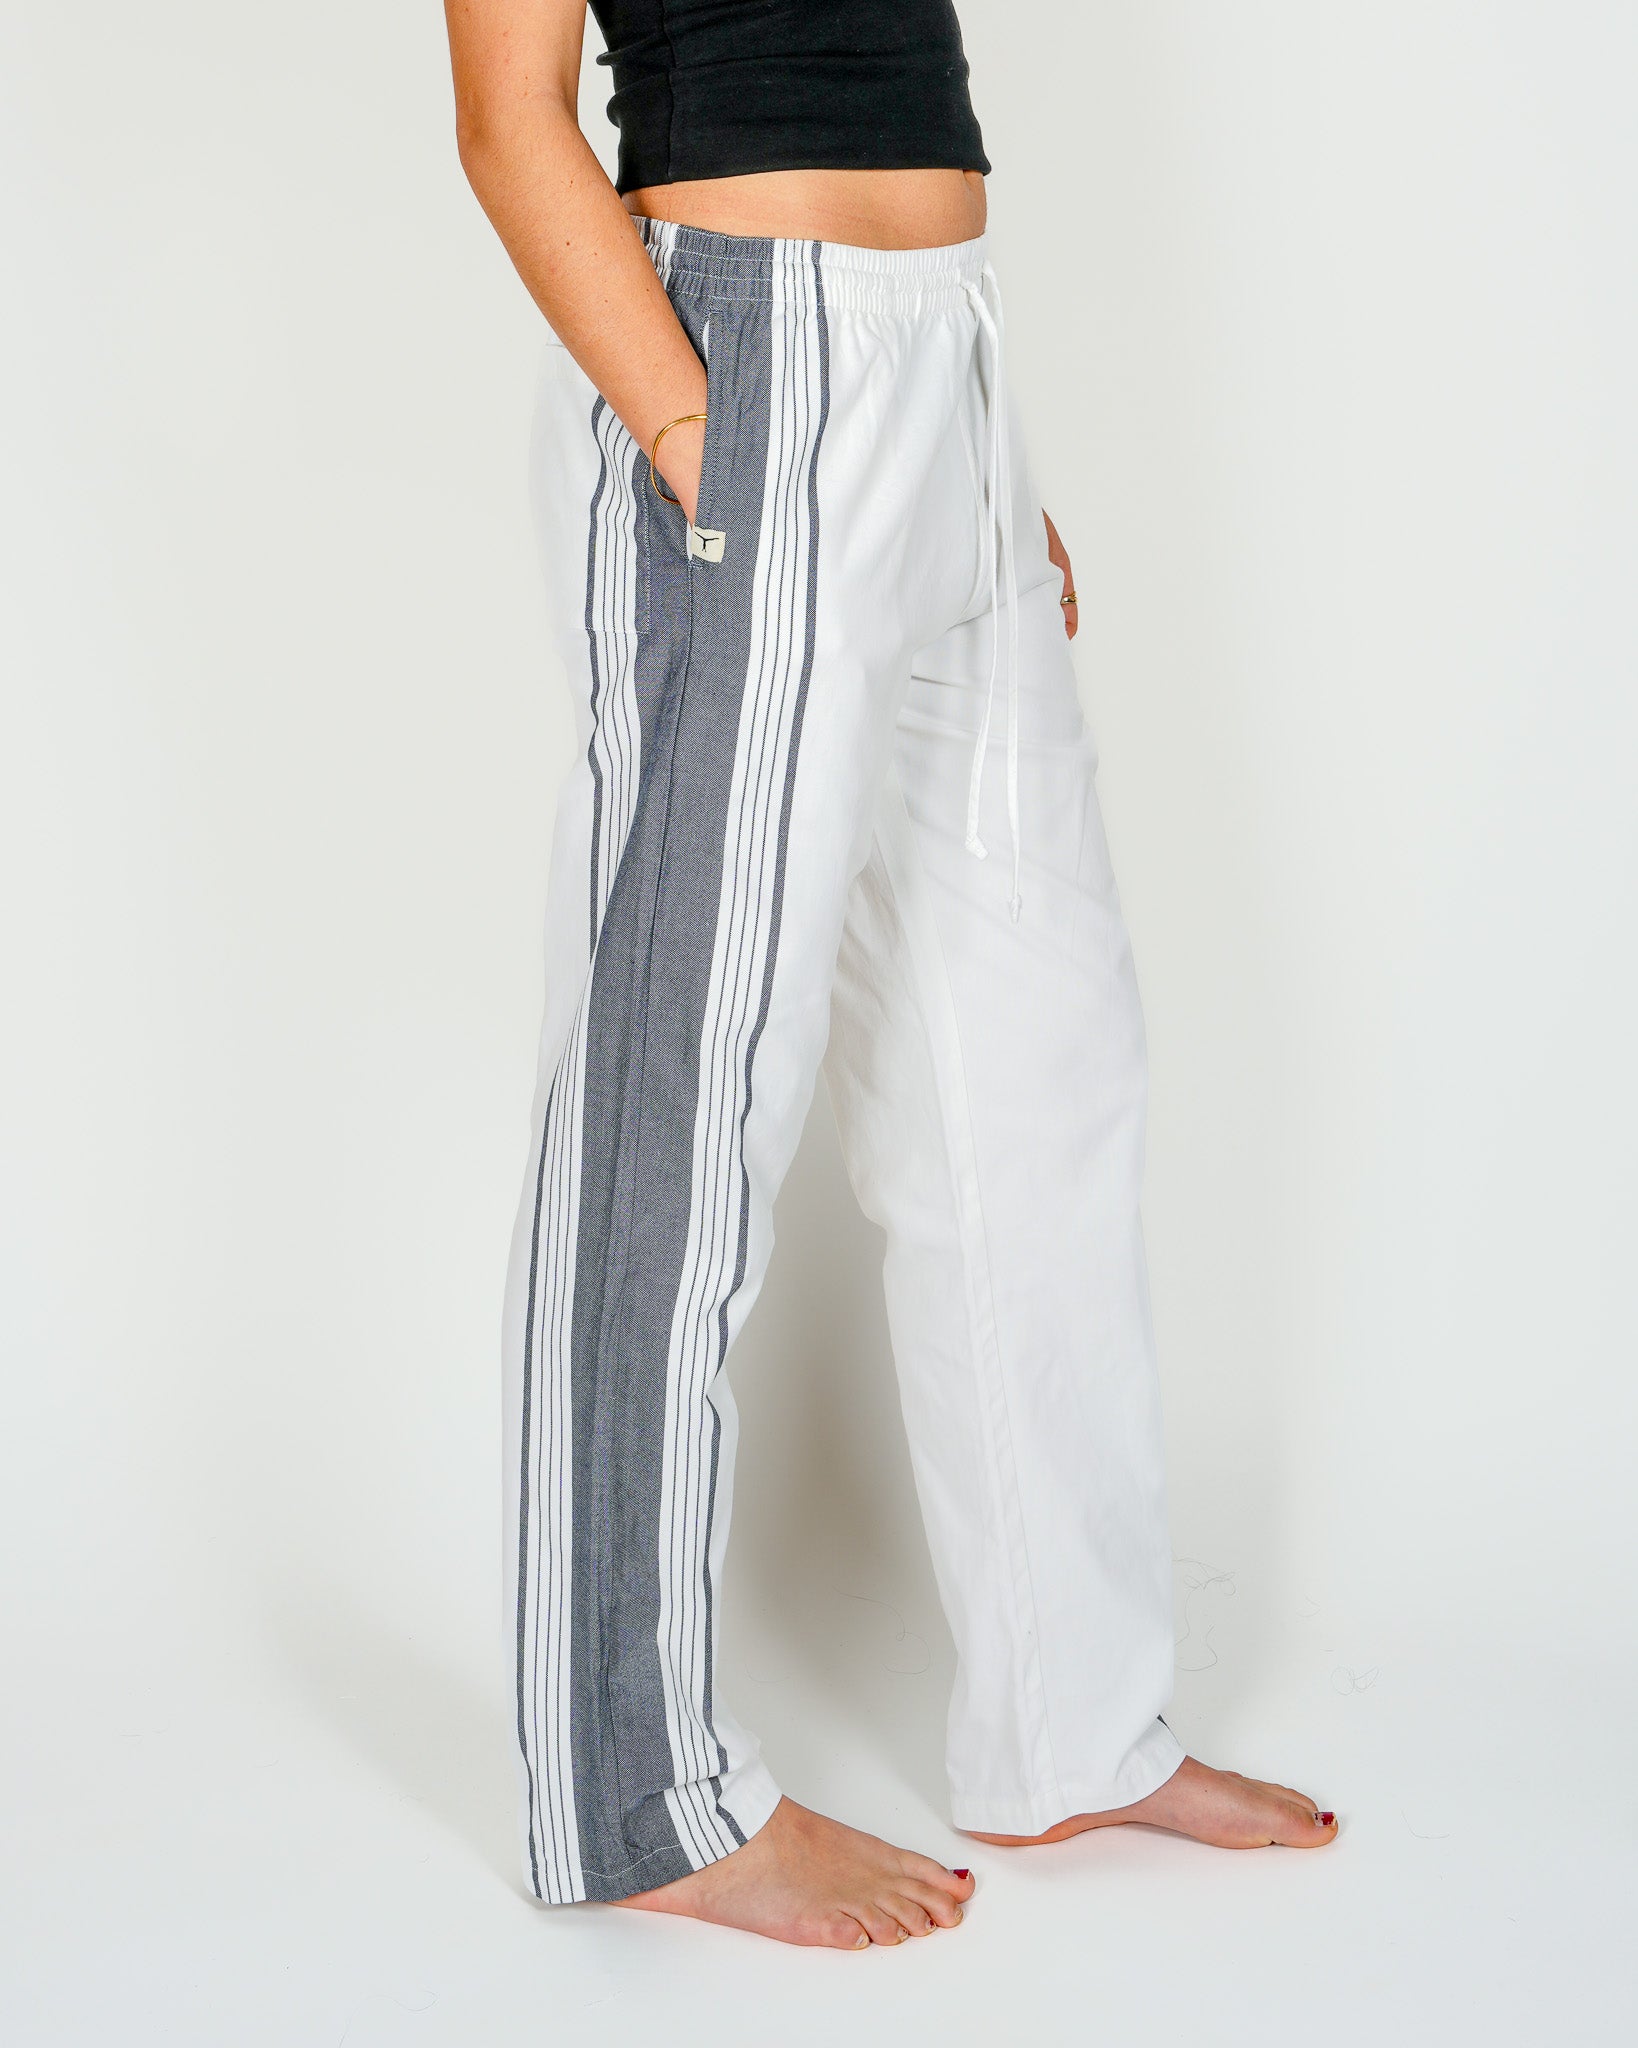 Classic White and Navy Lounge Pant (Pre-Loved) – Tom's Trunks